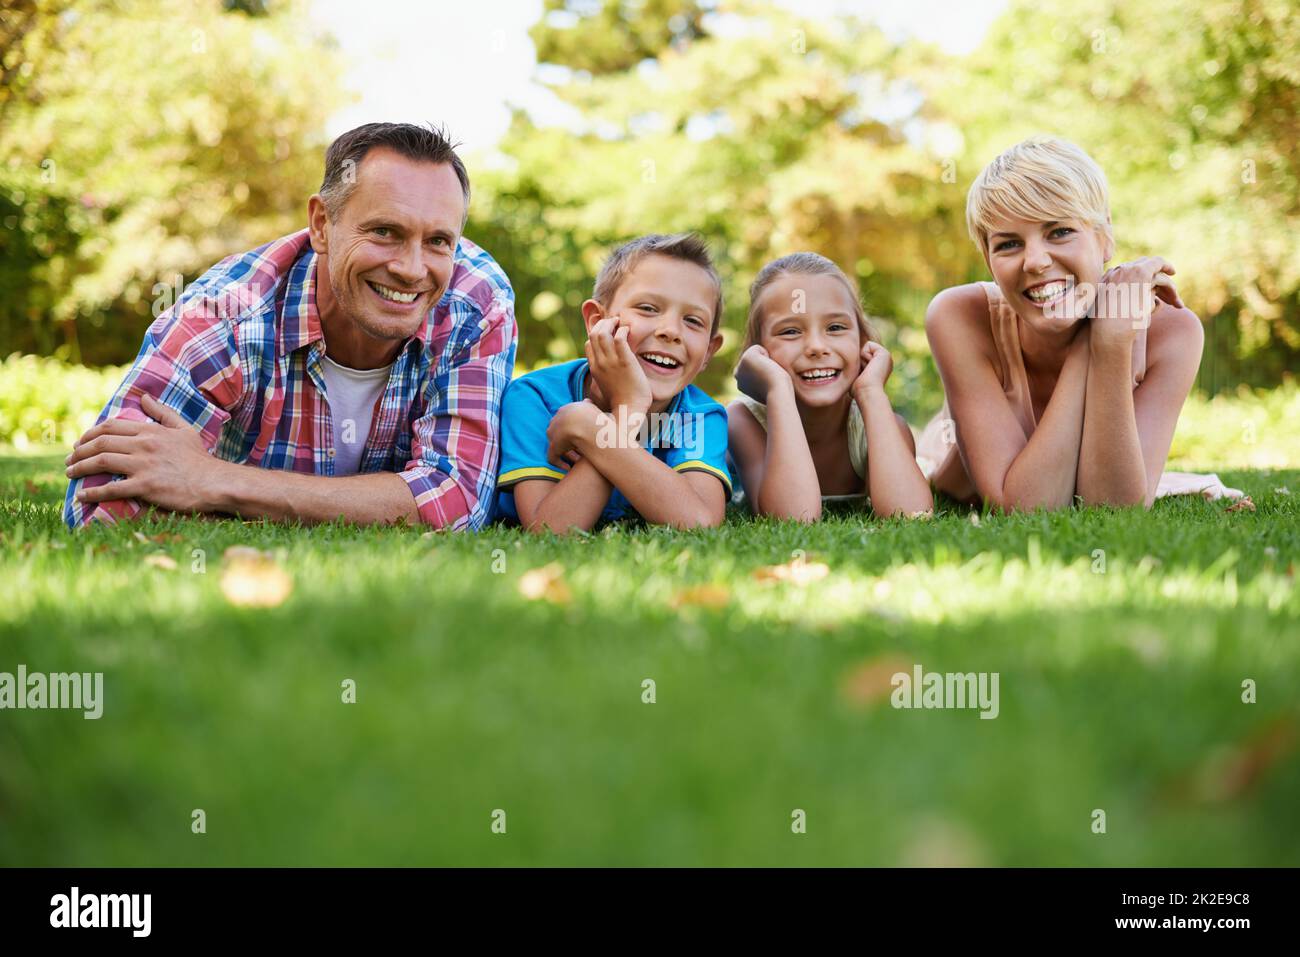 These are the moments that count in life.... A front view portrait of a happy family lying on the grass outdoors. Stock Photo